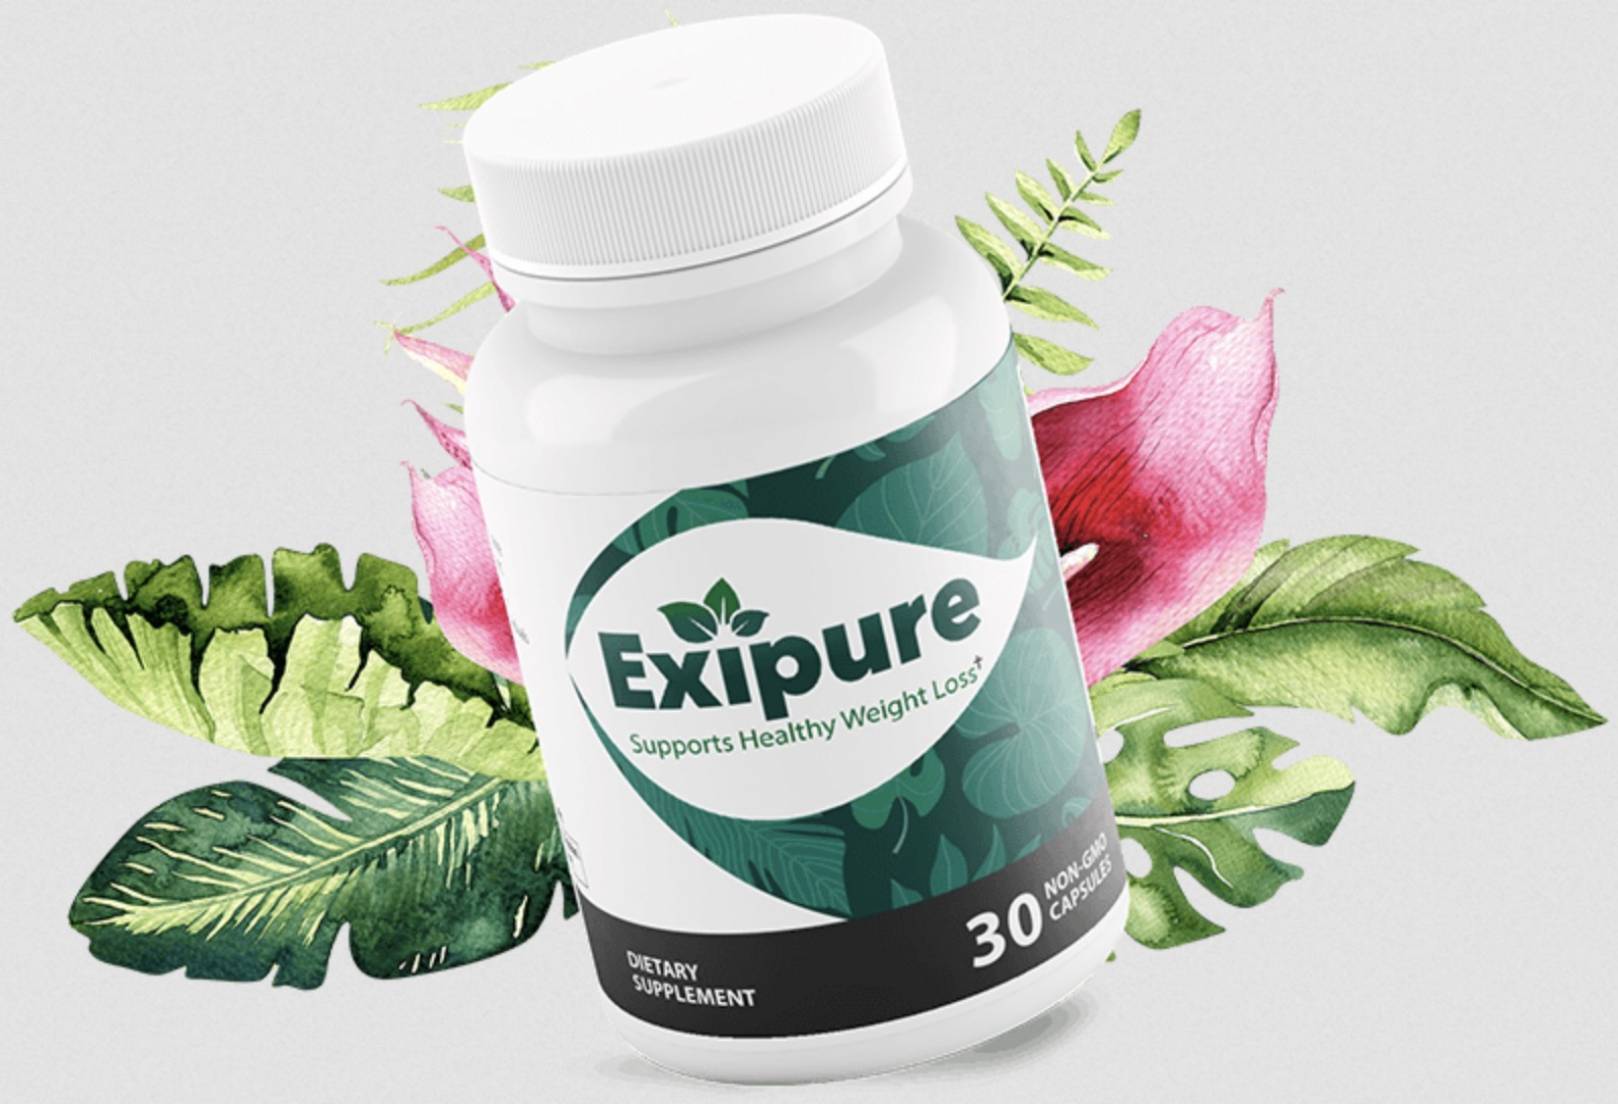 What Is The Best Time To Take Exipure